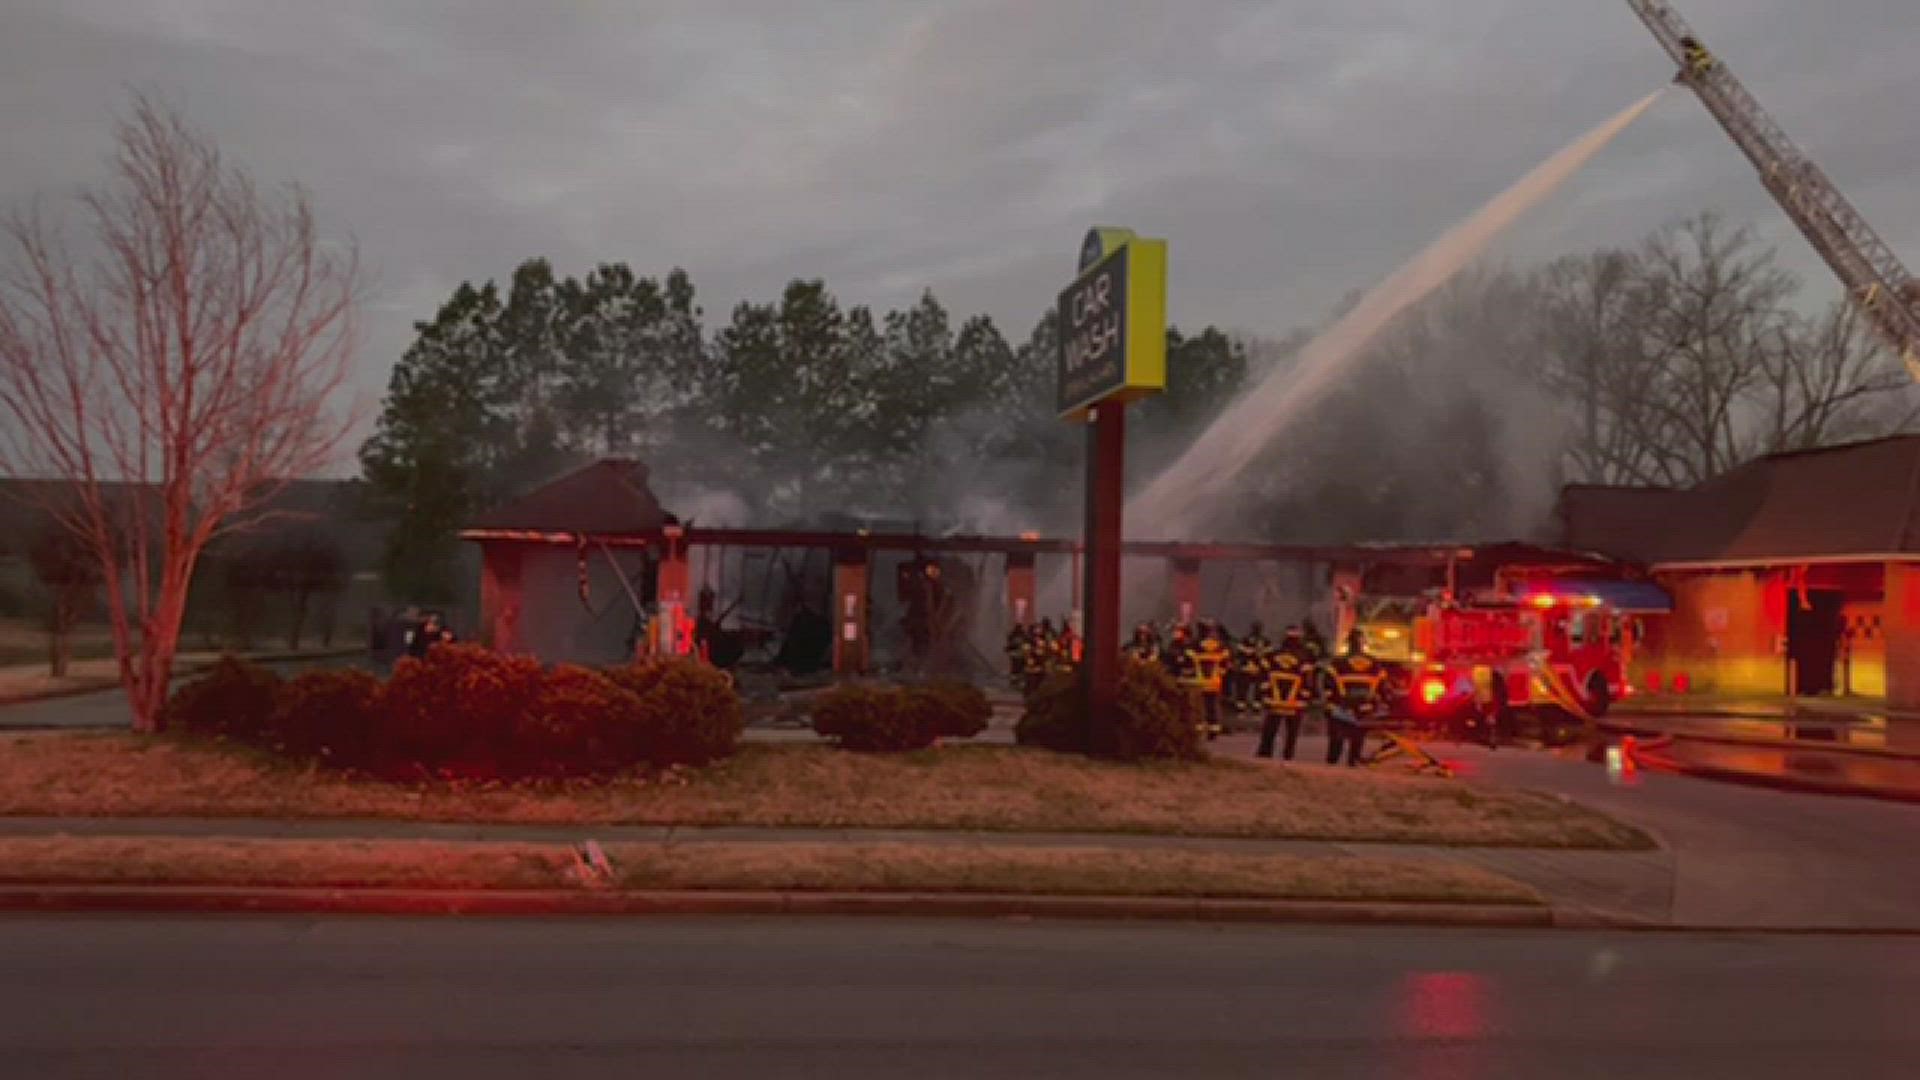 A car on fire spread to the structure of the car wash